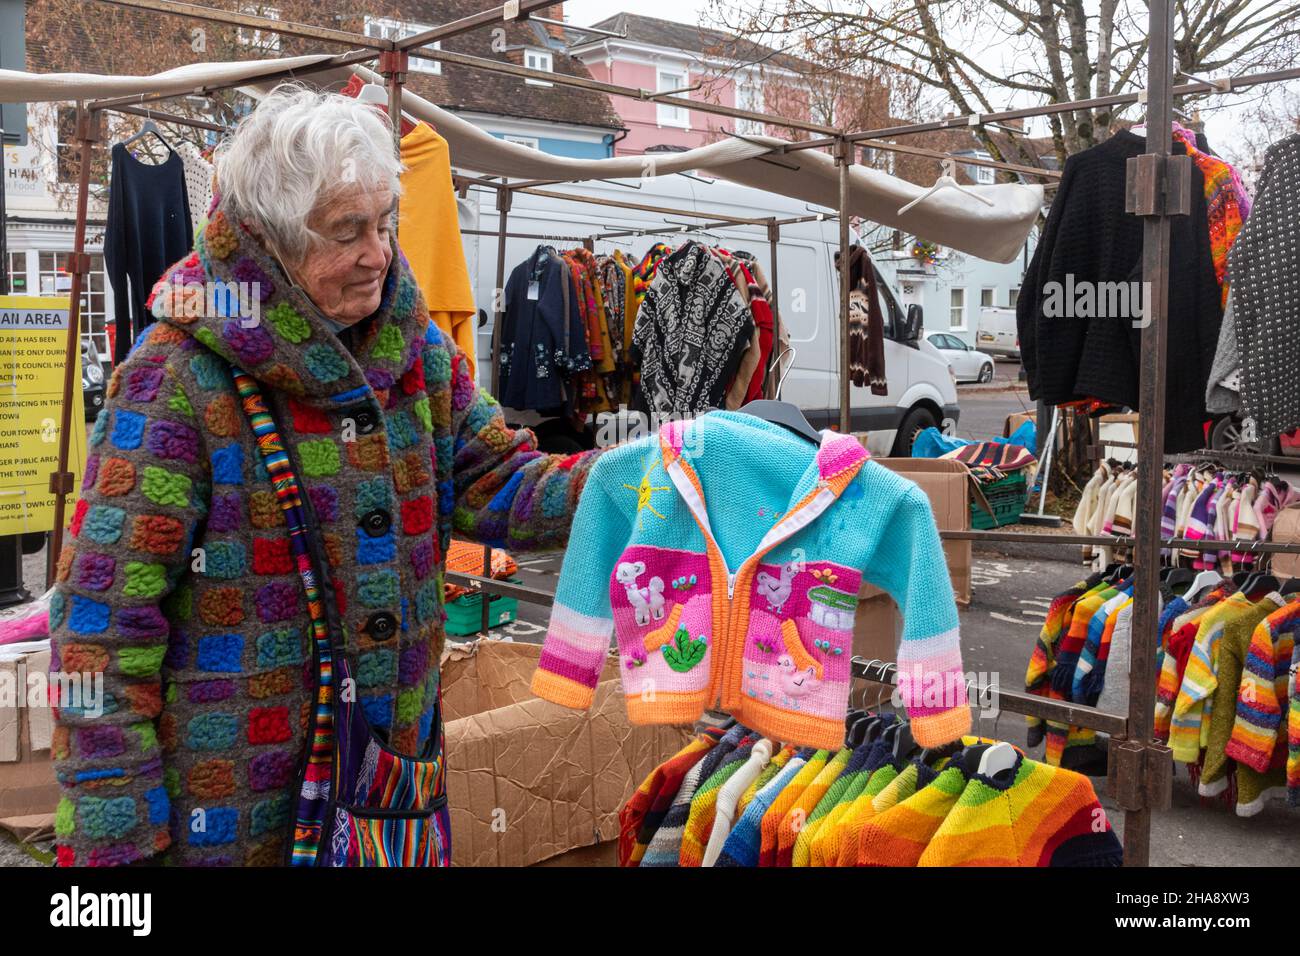 Senior woman working on a market stall selling brightly coloured handmade woollen jackets, jumpers, cardigans, UK. Market vendor. Stock Photo